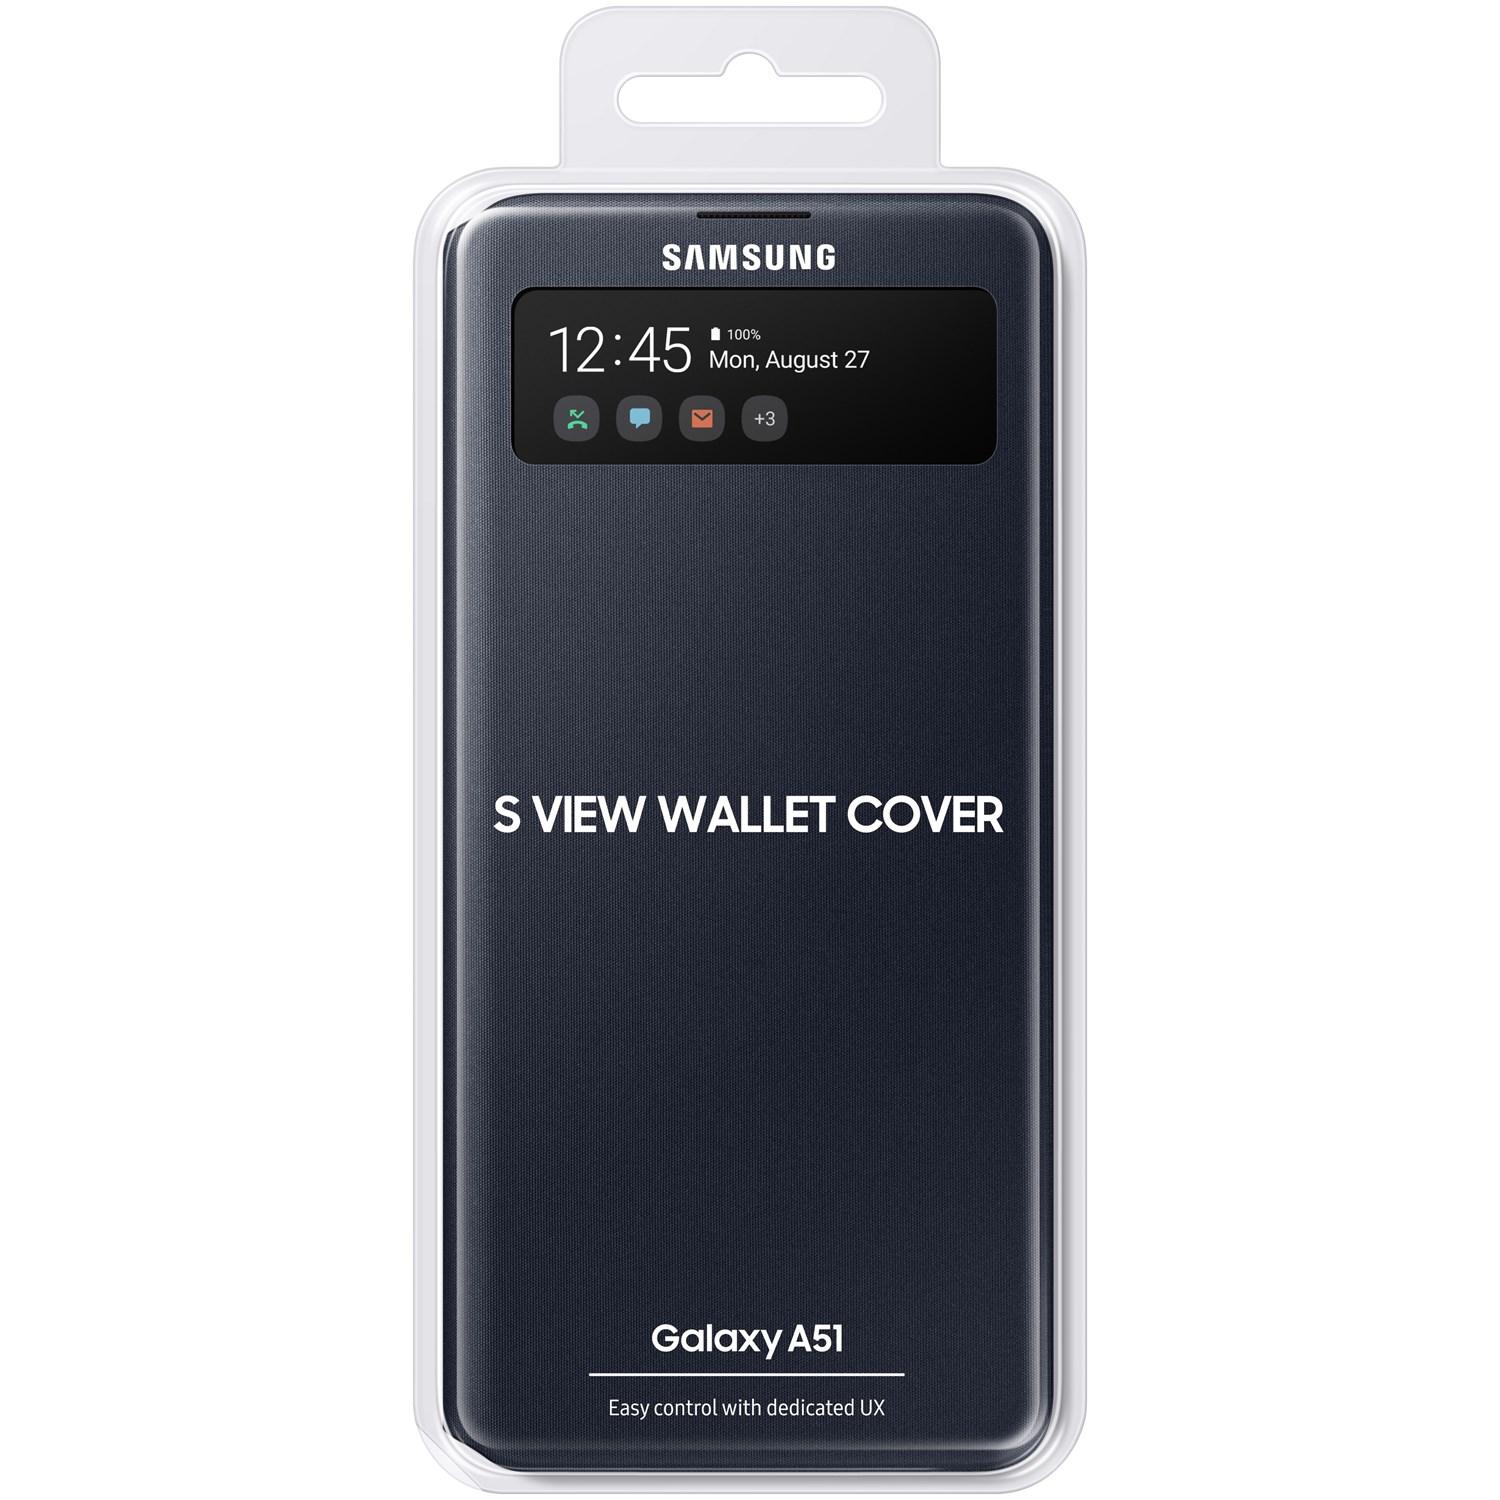 S View Wallet Cover Galaxy A51 Black